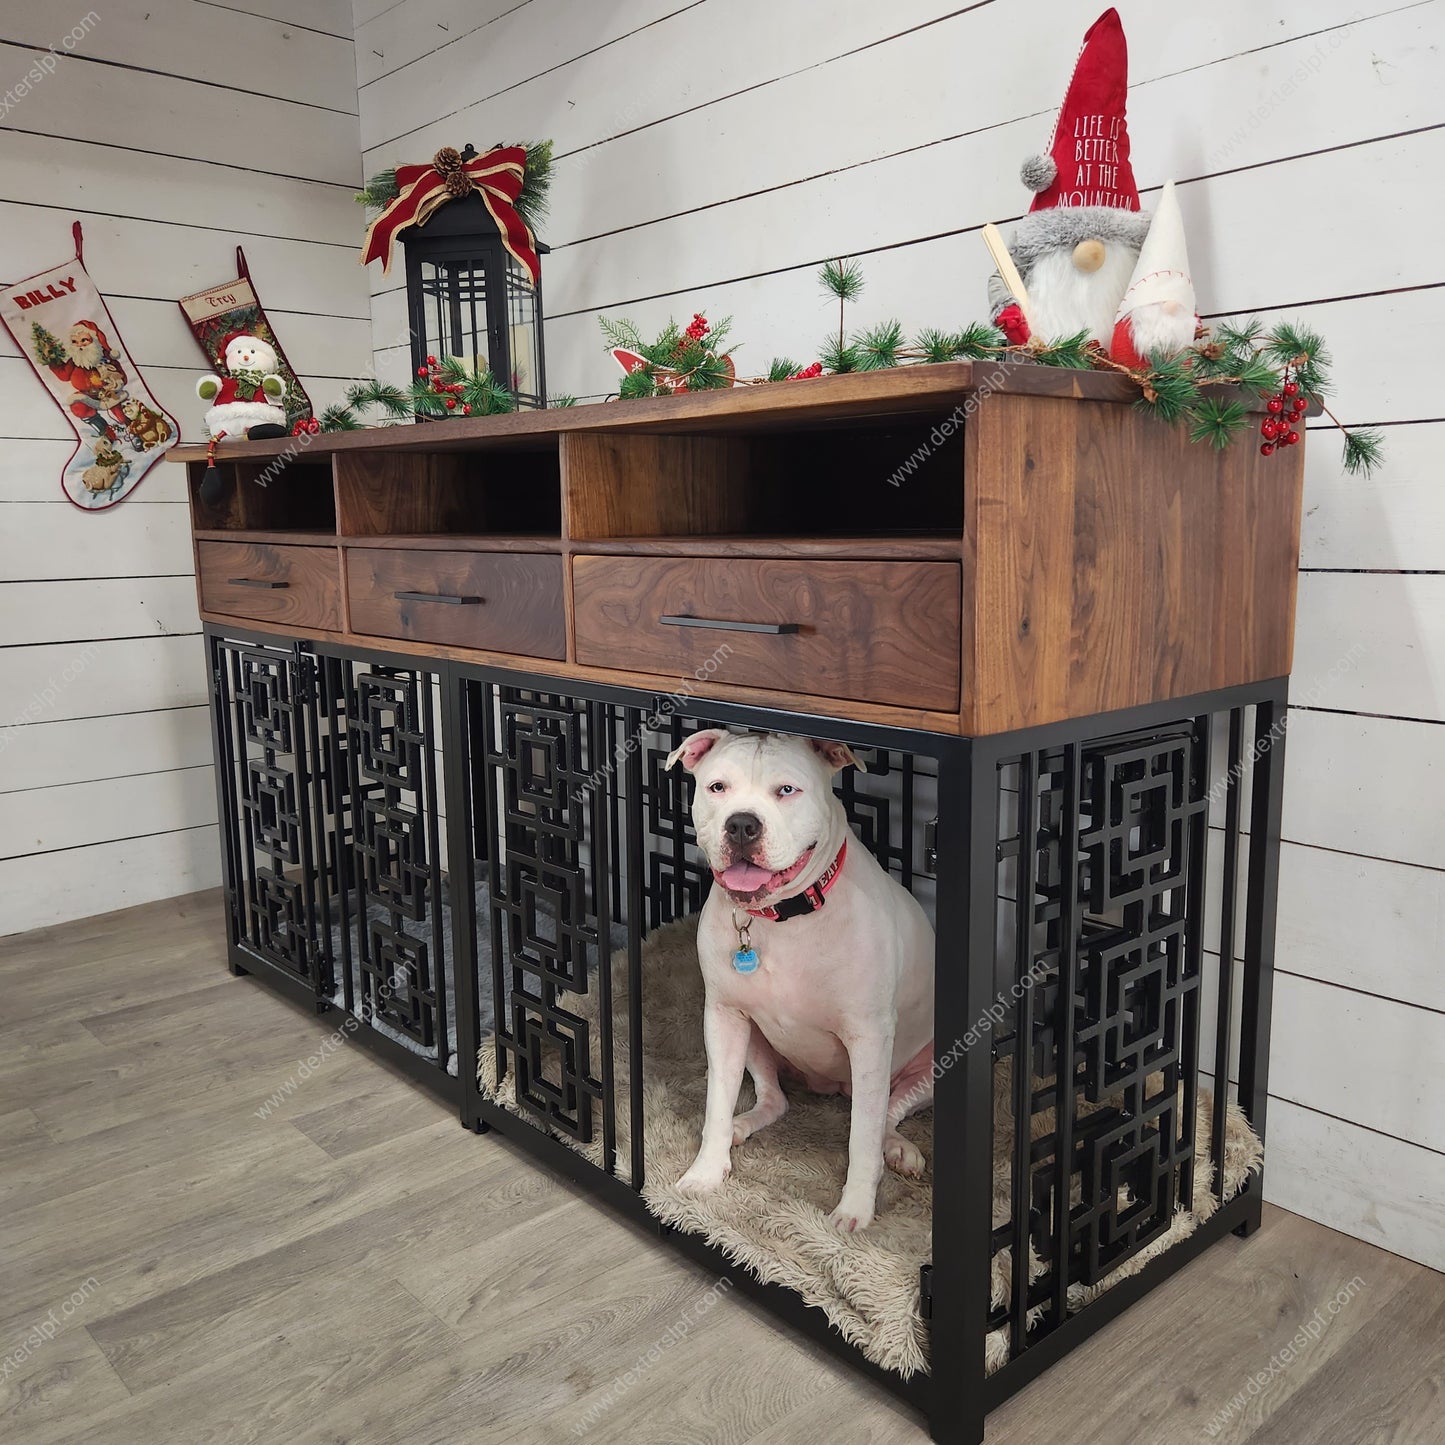 Double Large Dog Crate Plans